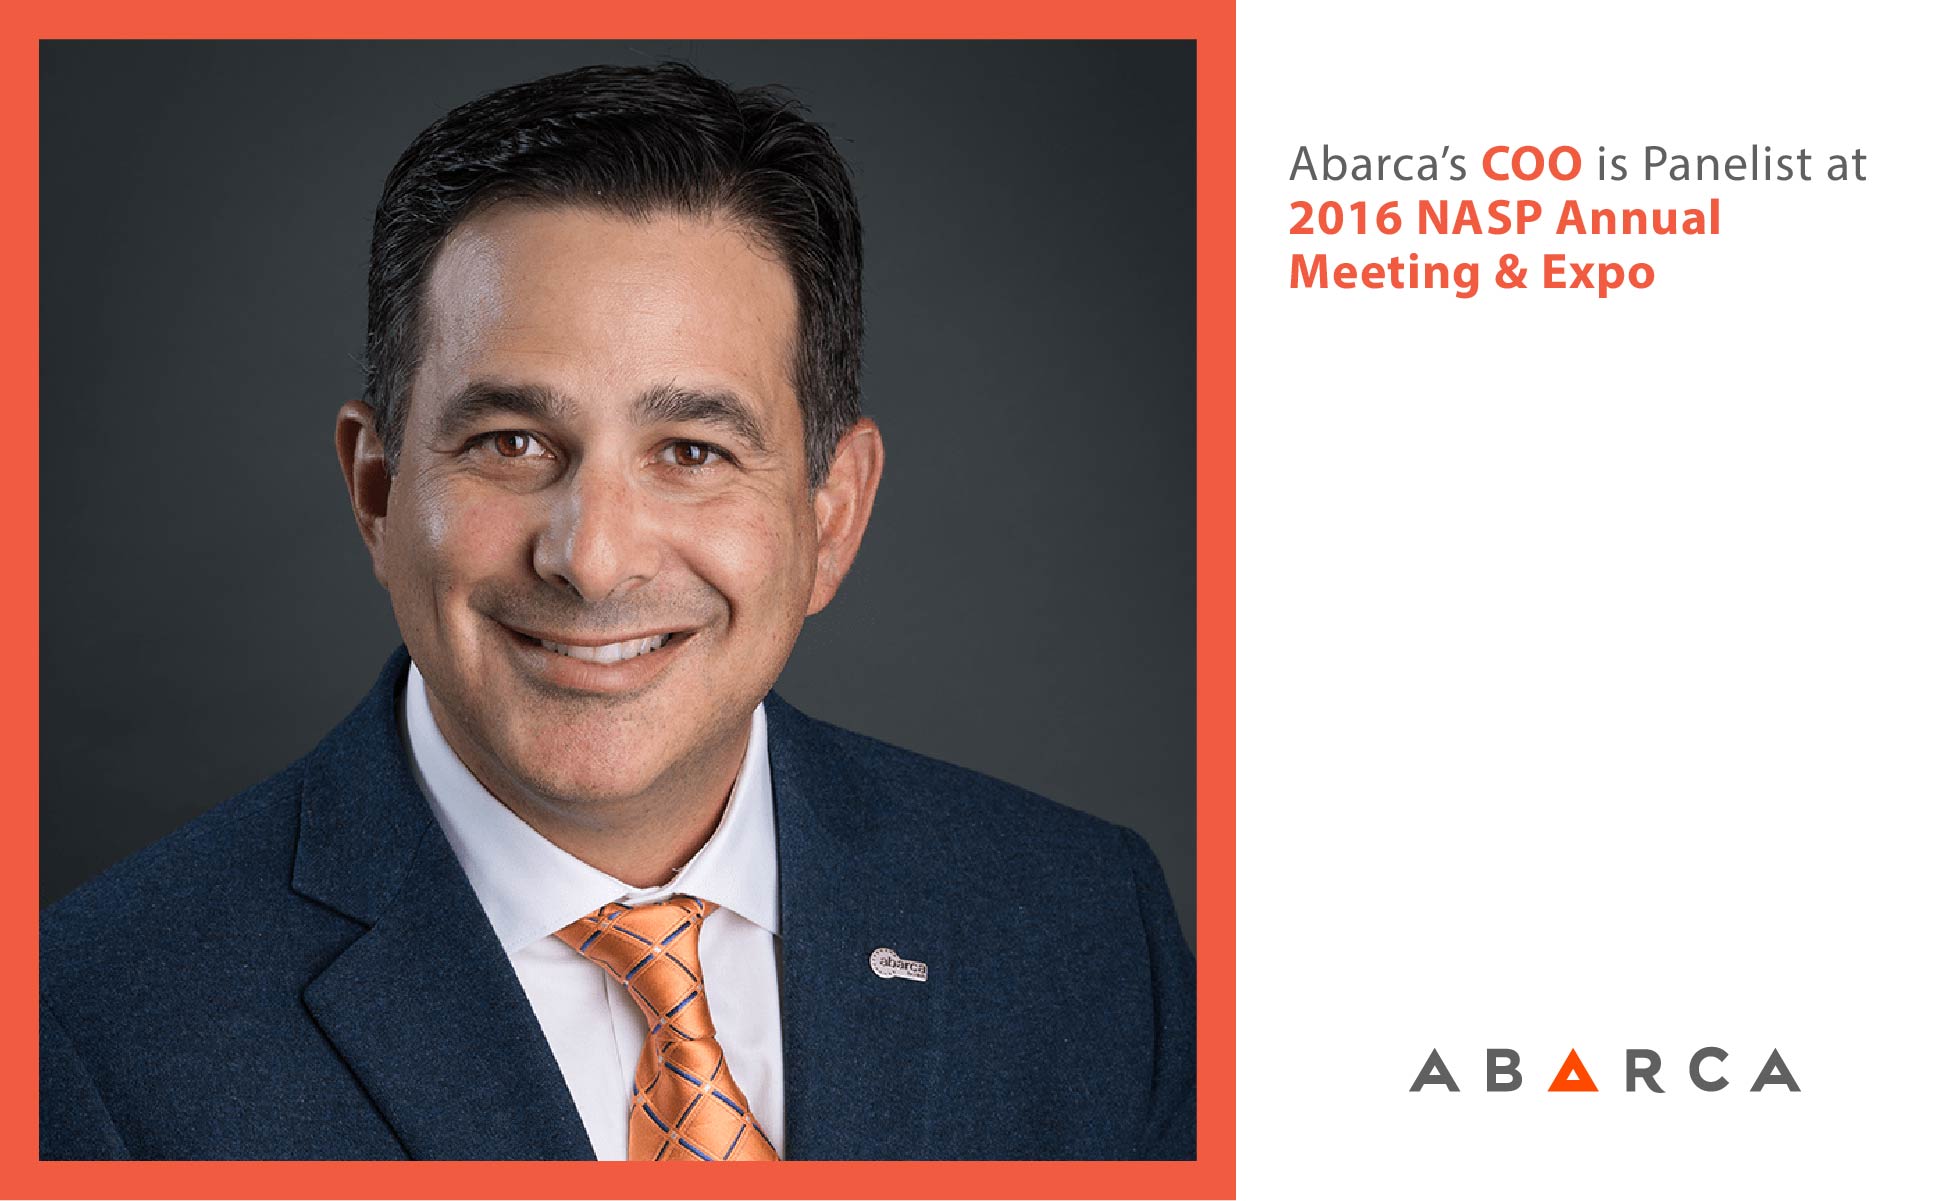 Abarca Health's Chief Operating Office, Javier Gonzalez, is a panelist at the 2016 NASP Annual Meeting & Expo